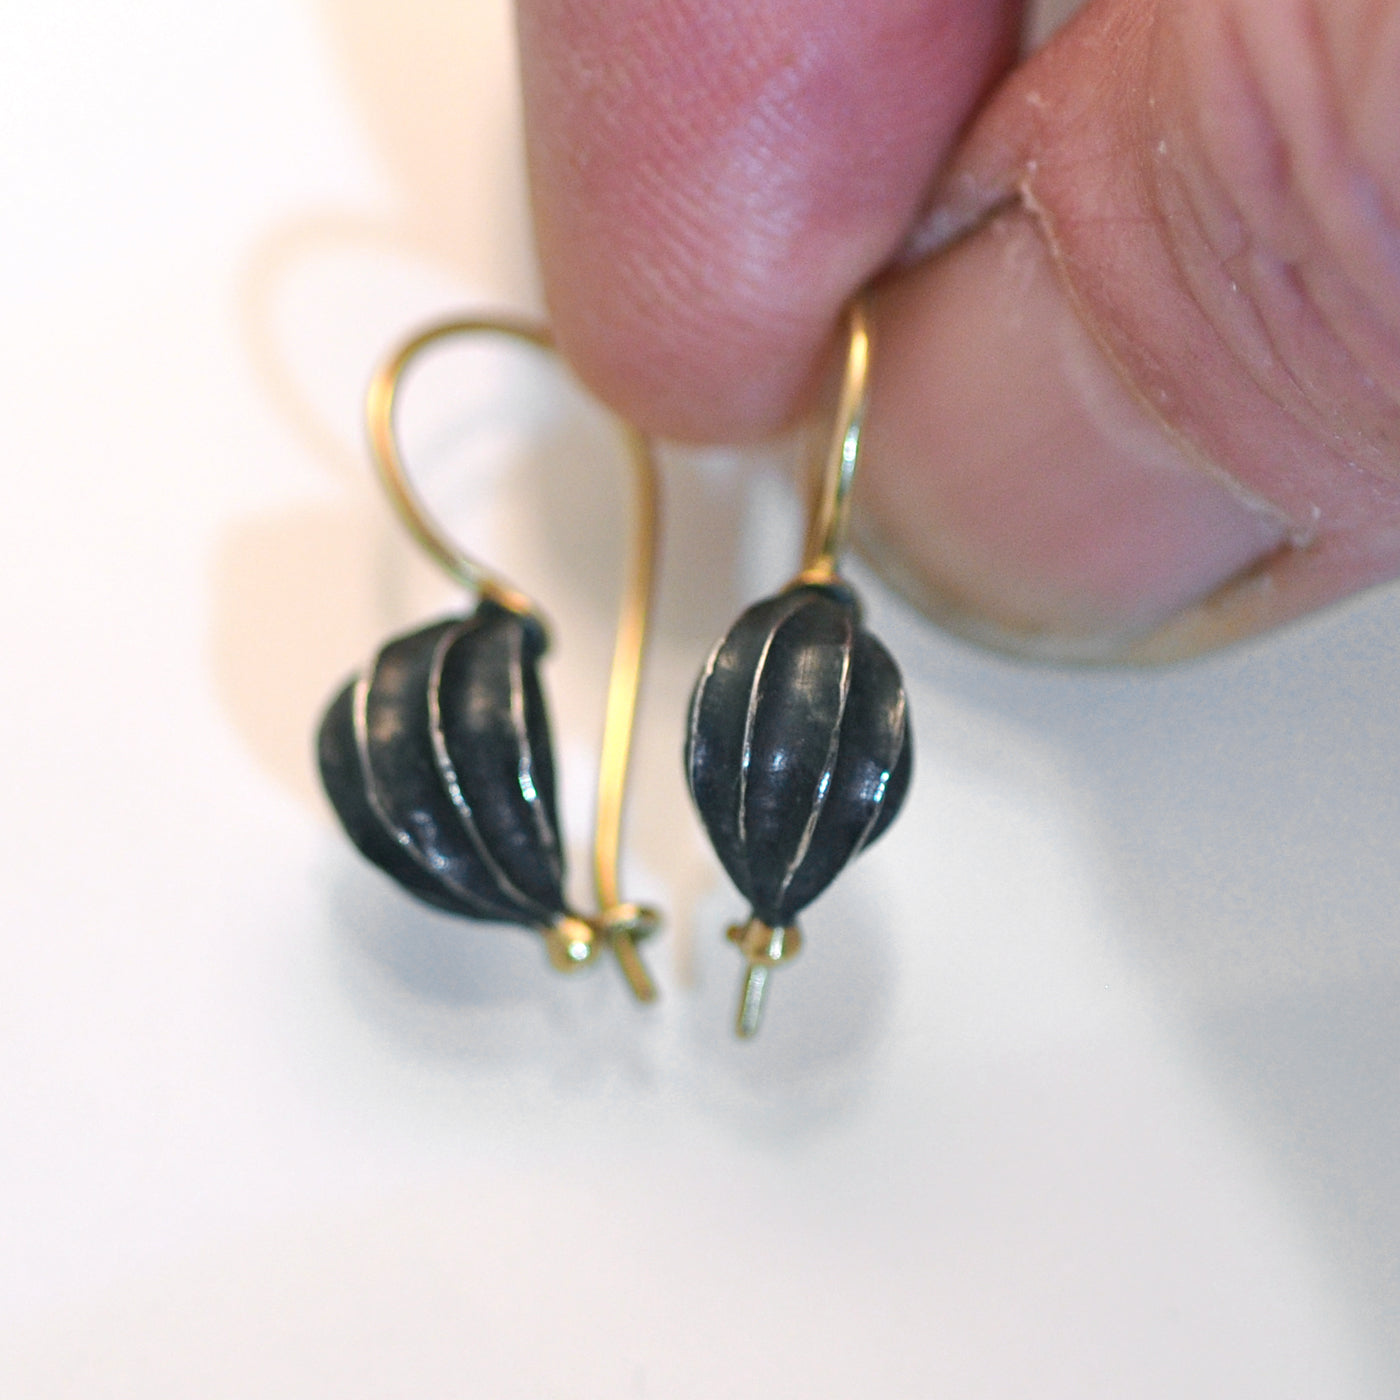 Fat seed pod earrings, oxidised silver with 18ct Gold wire